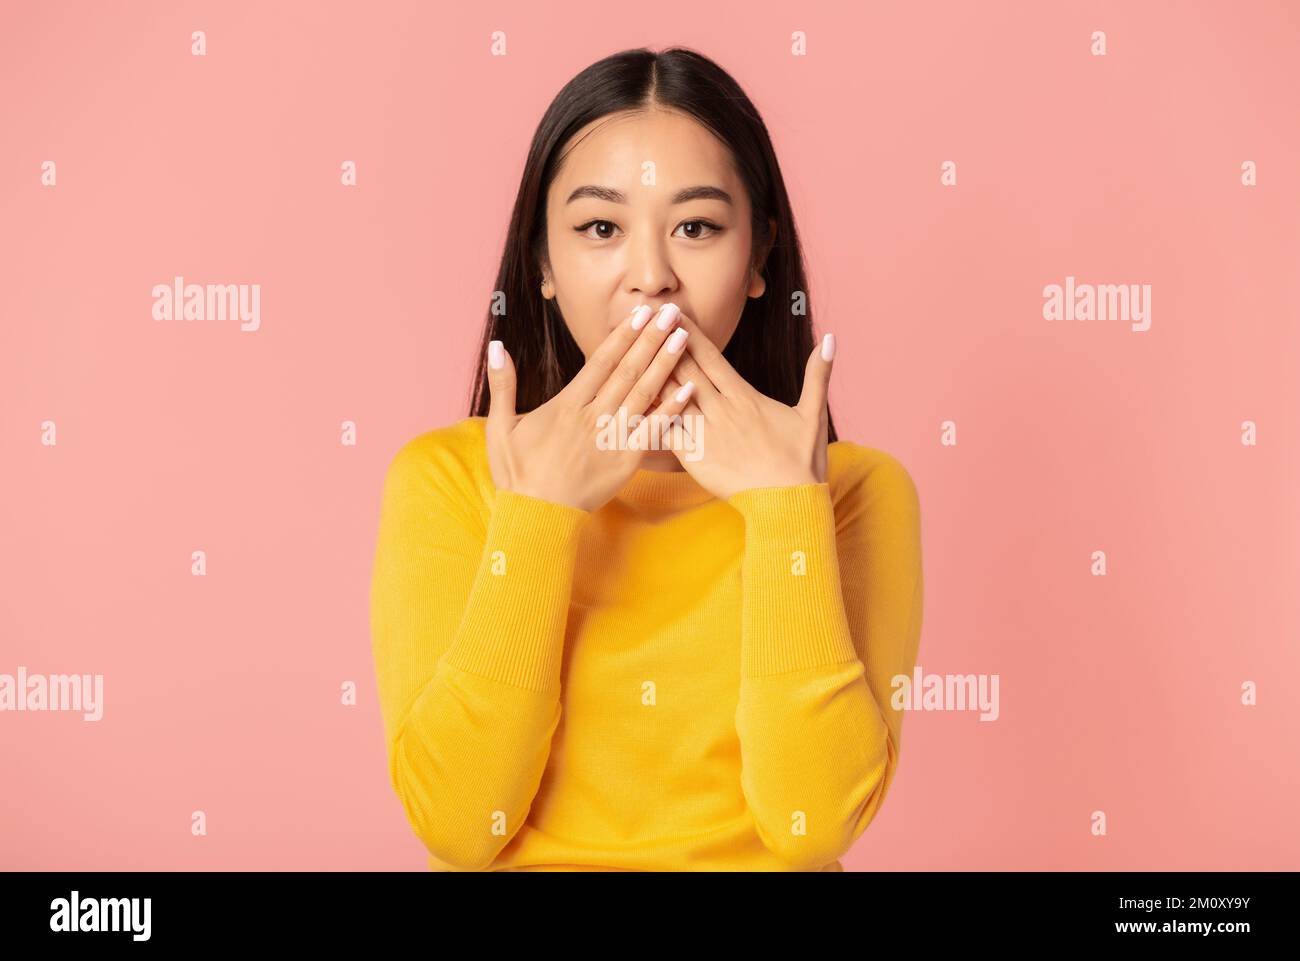 Surprised woman covering her mouth with hands while standing on pink background looking at the camera Stock Photo